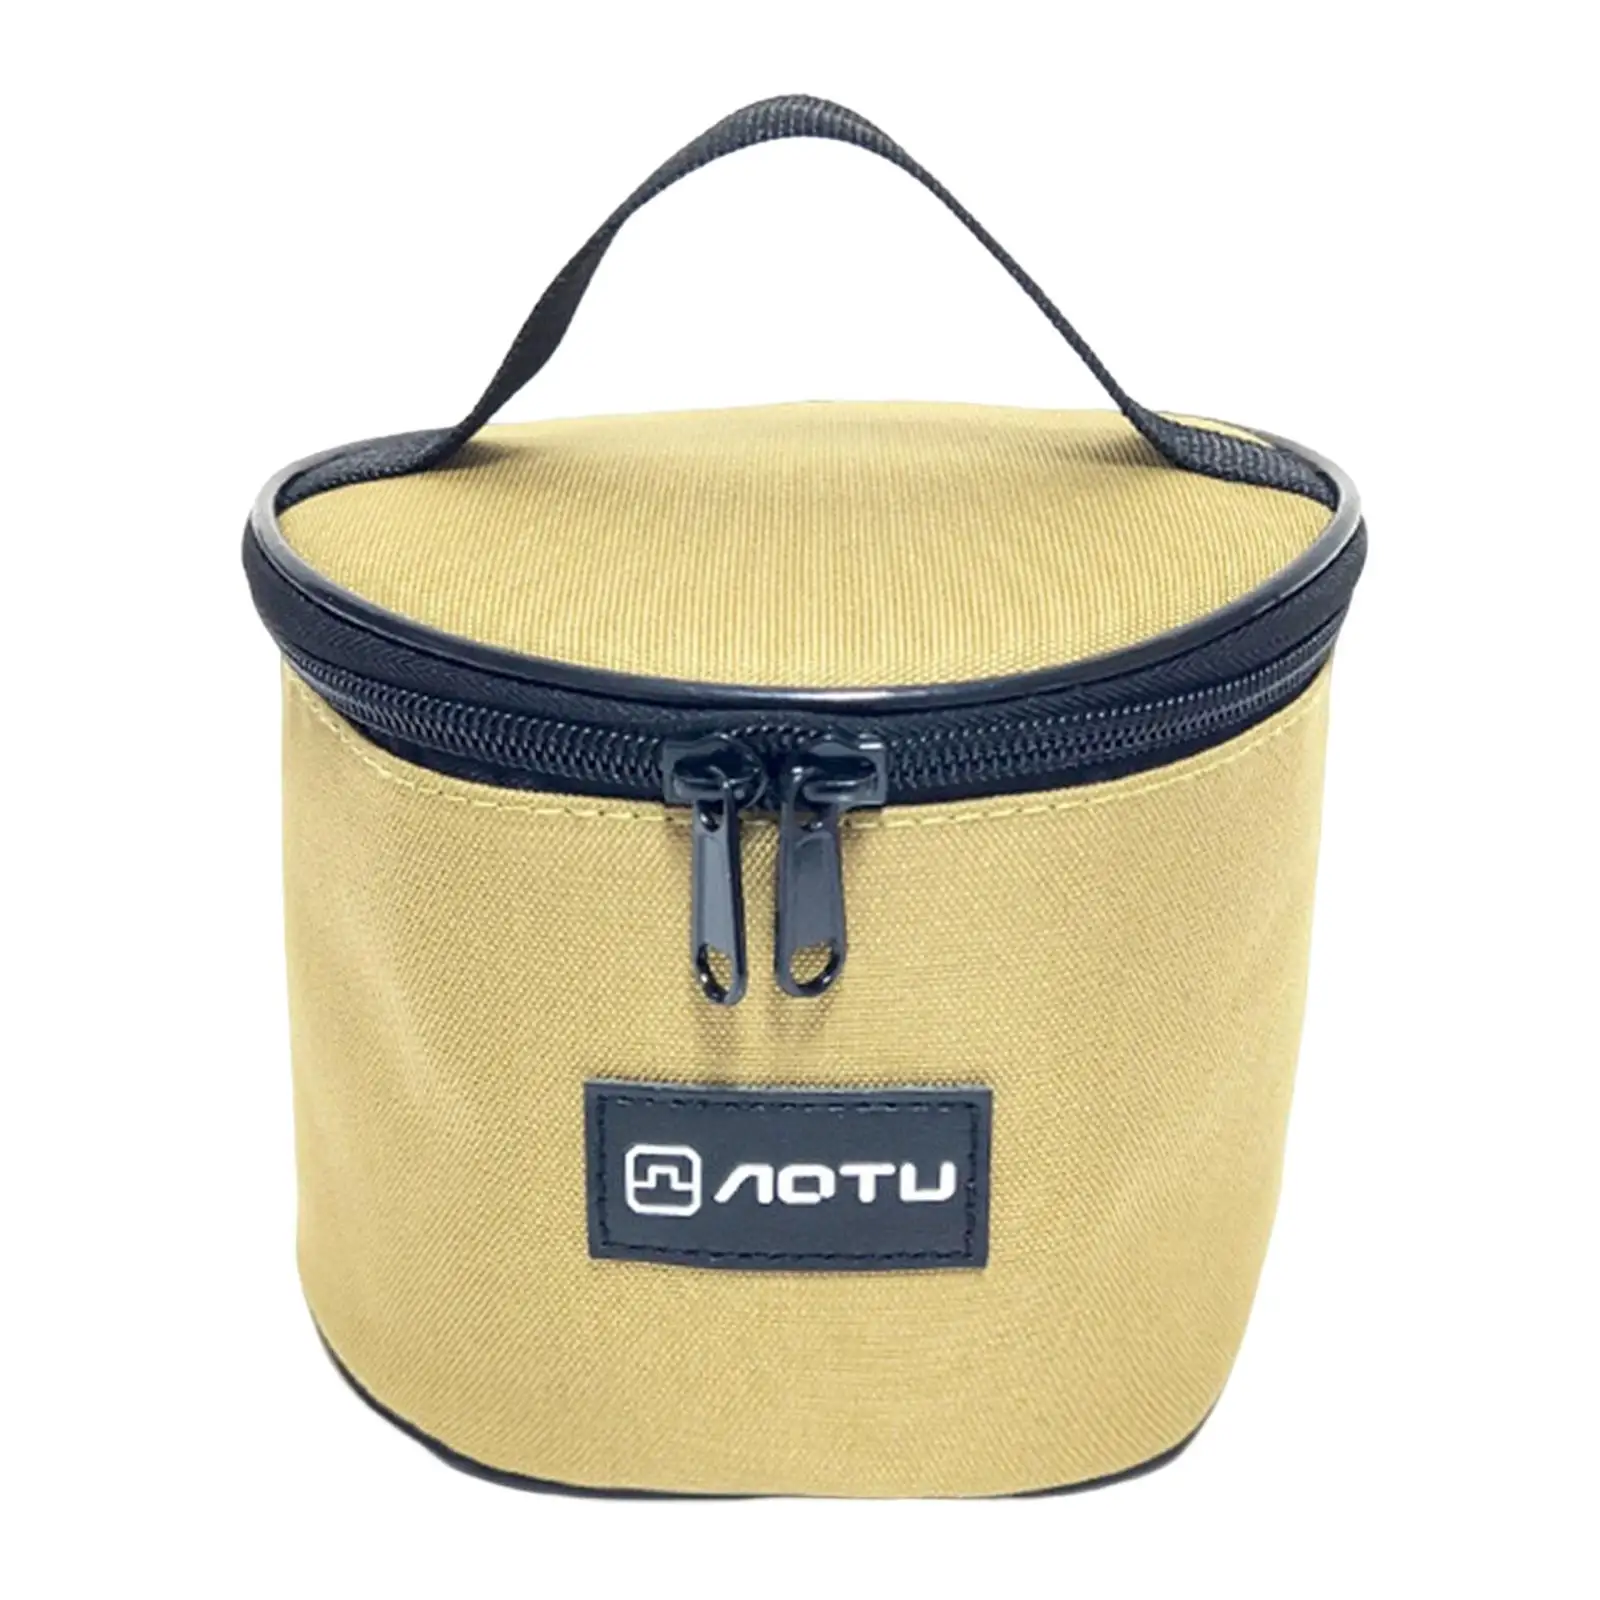 Portable Bowl Storage Bag Organizer Hanging Waterproof Activities Tableware Hiking Camping Pouch for Picnic Dinnerware Cutlery